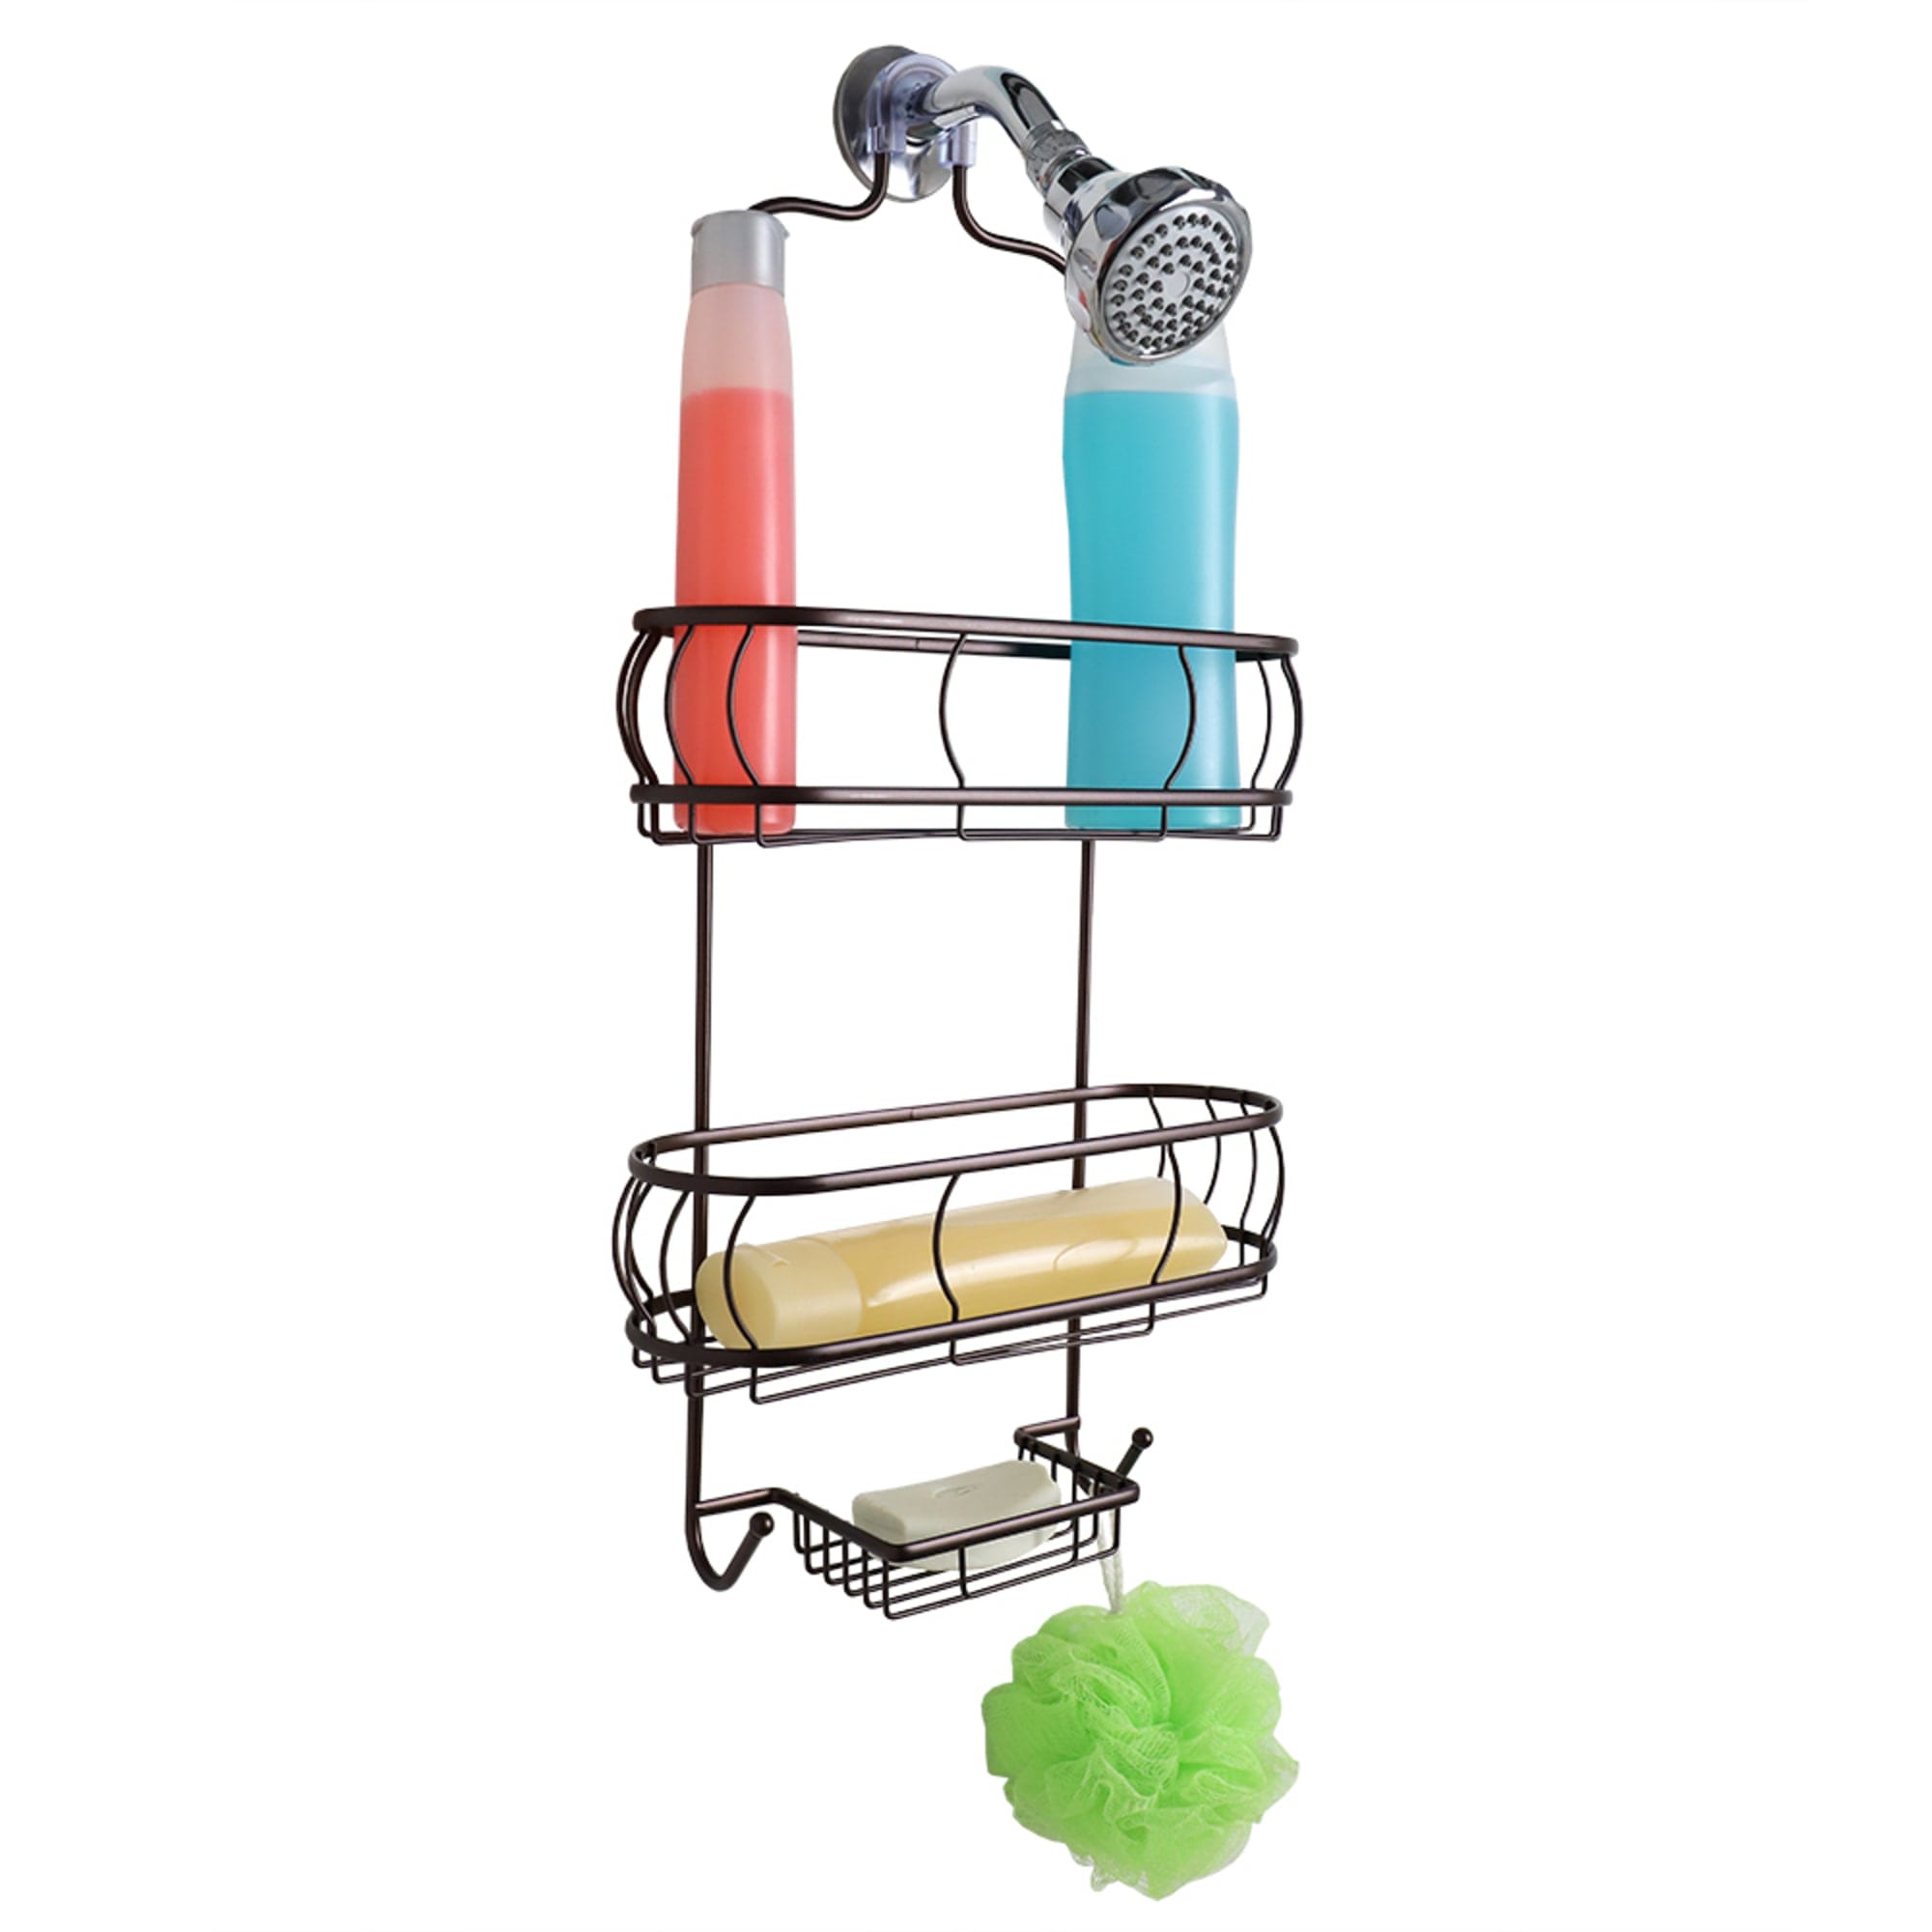 Home Basics No Slip 2 Tier Steel Shower Caddy, Oil-rubbed Bronze $15.00 EACH, CASE PACK OF 6